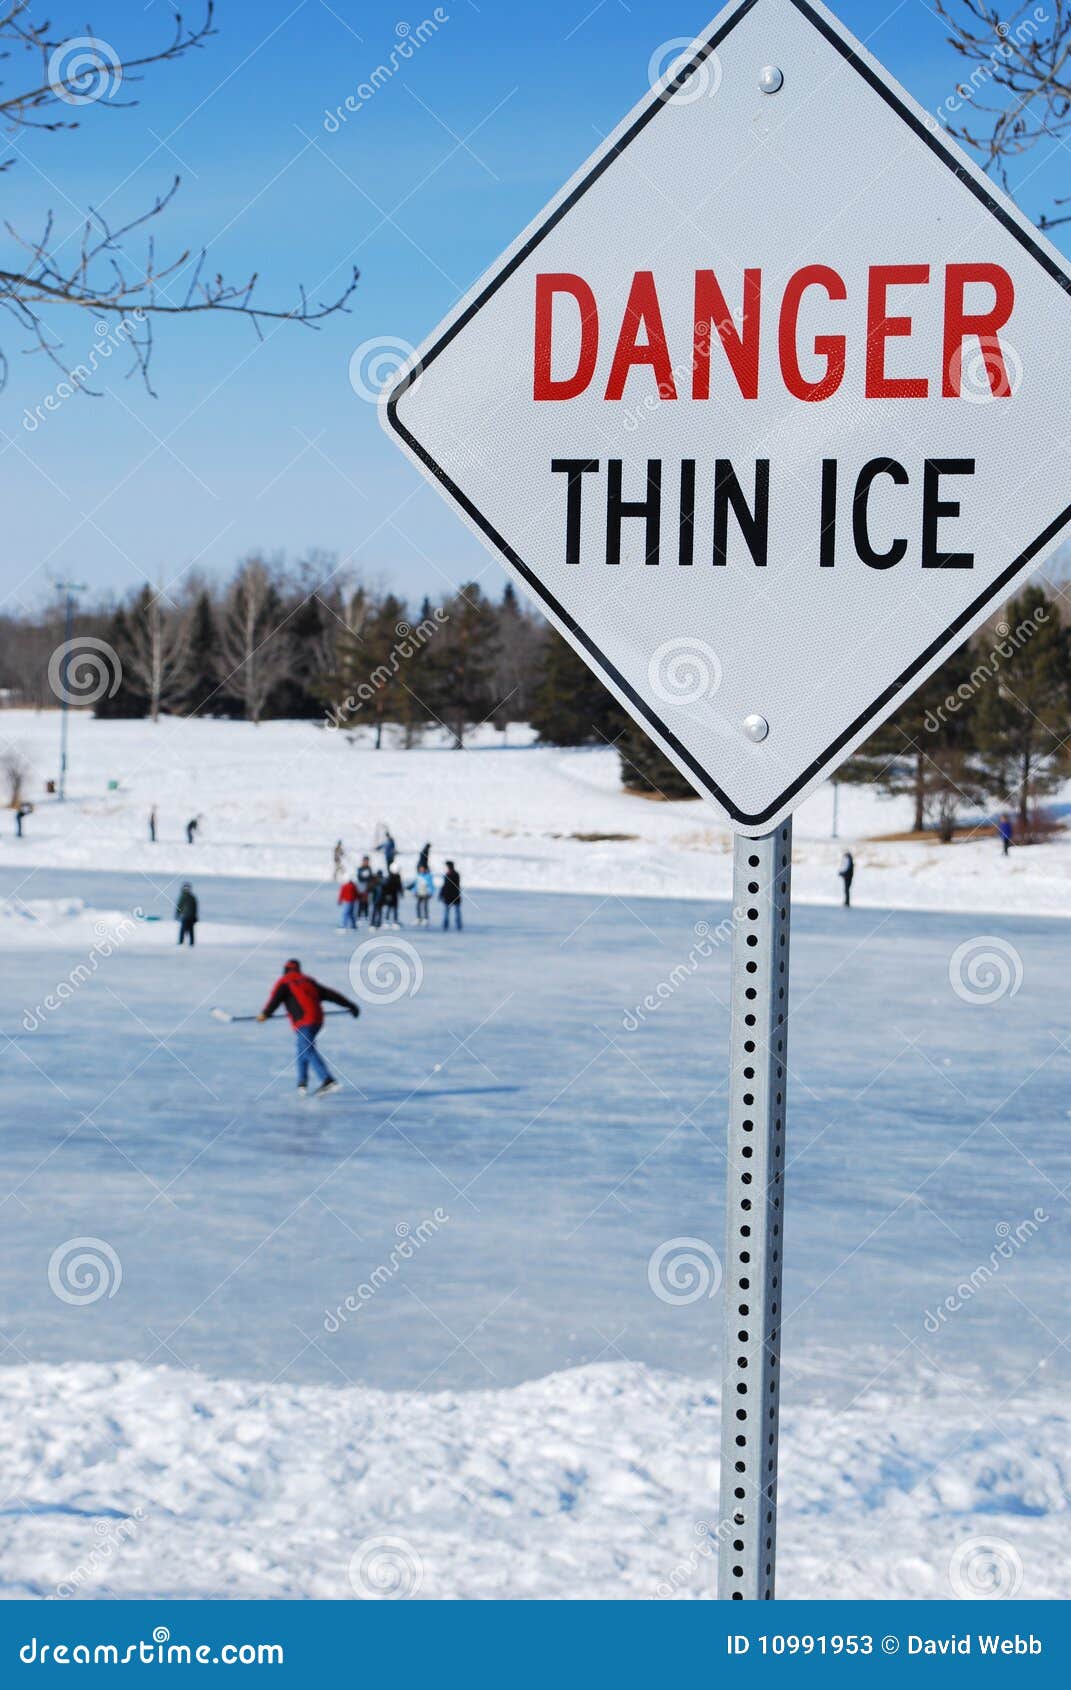 Example sentences containing 'on thin ice'